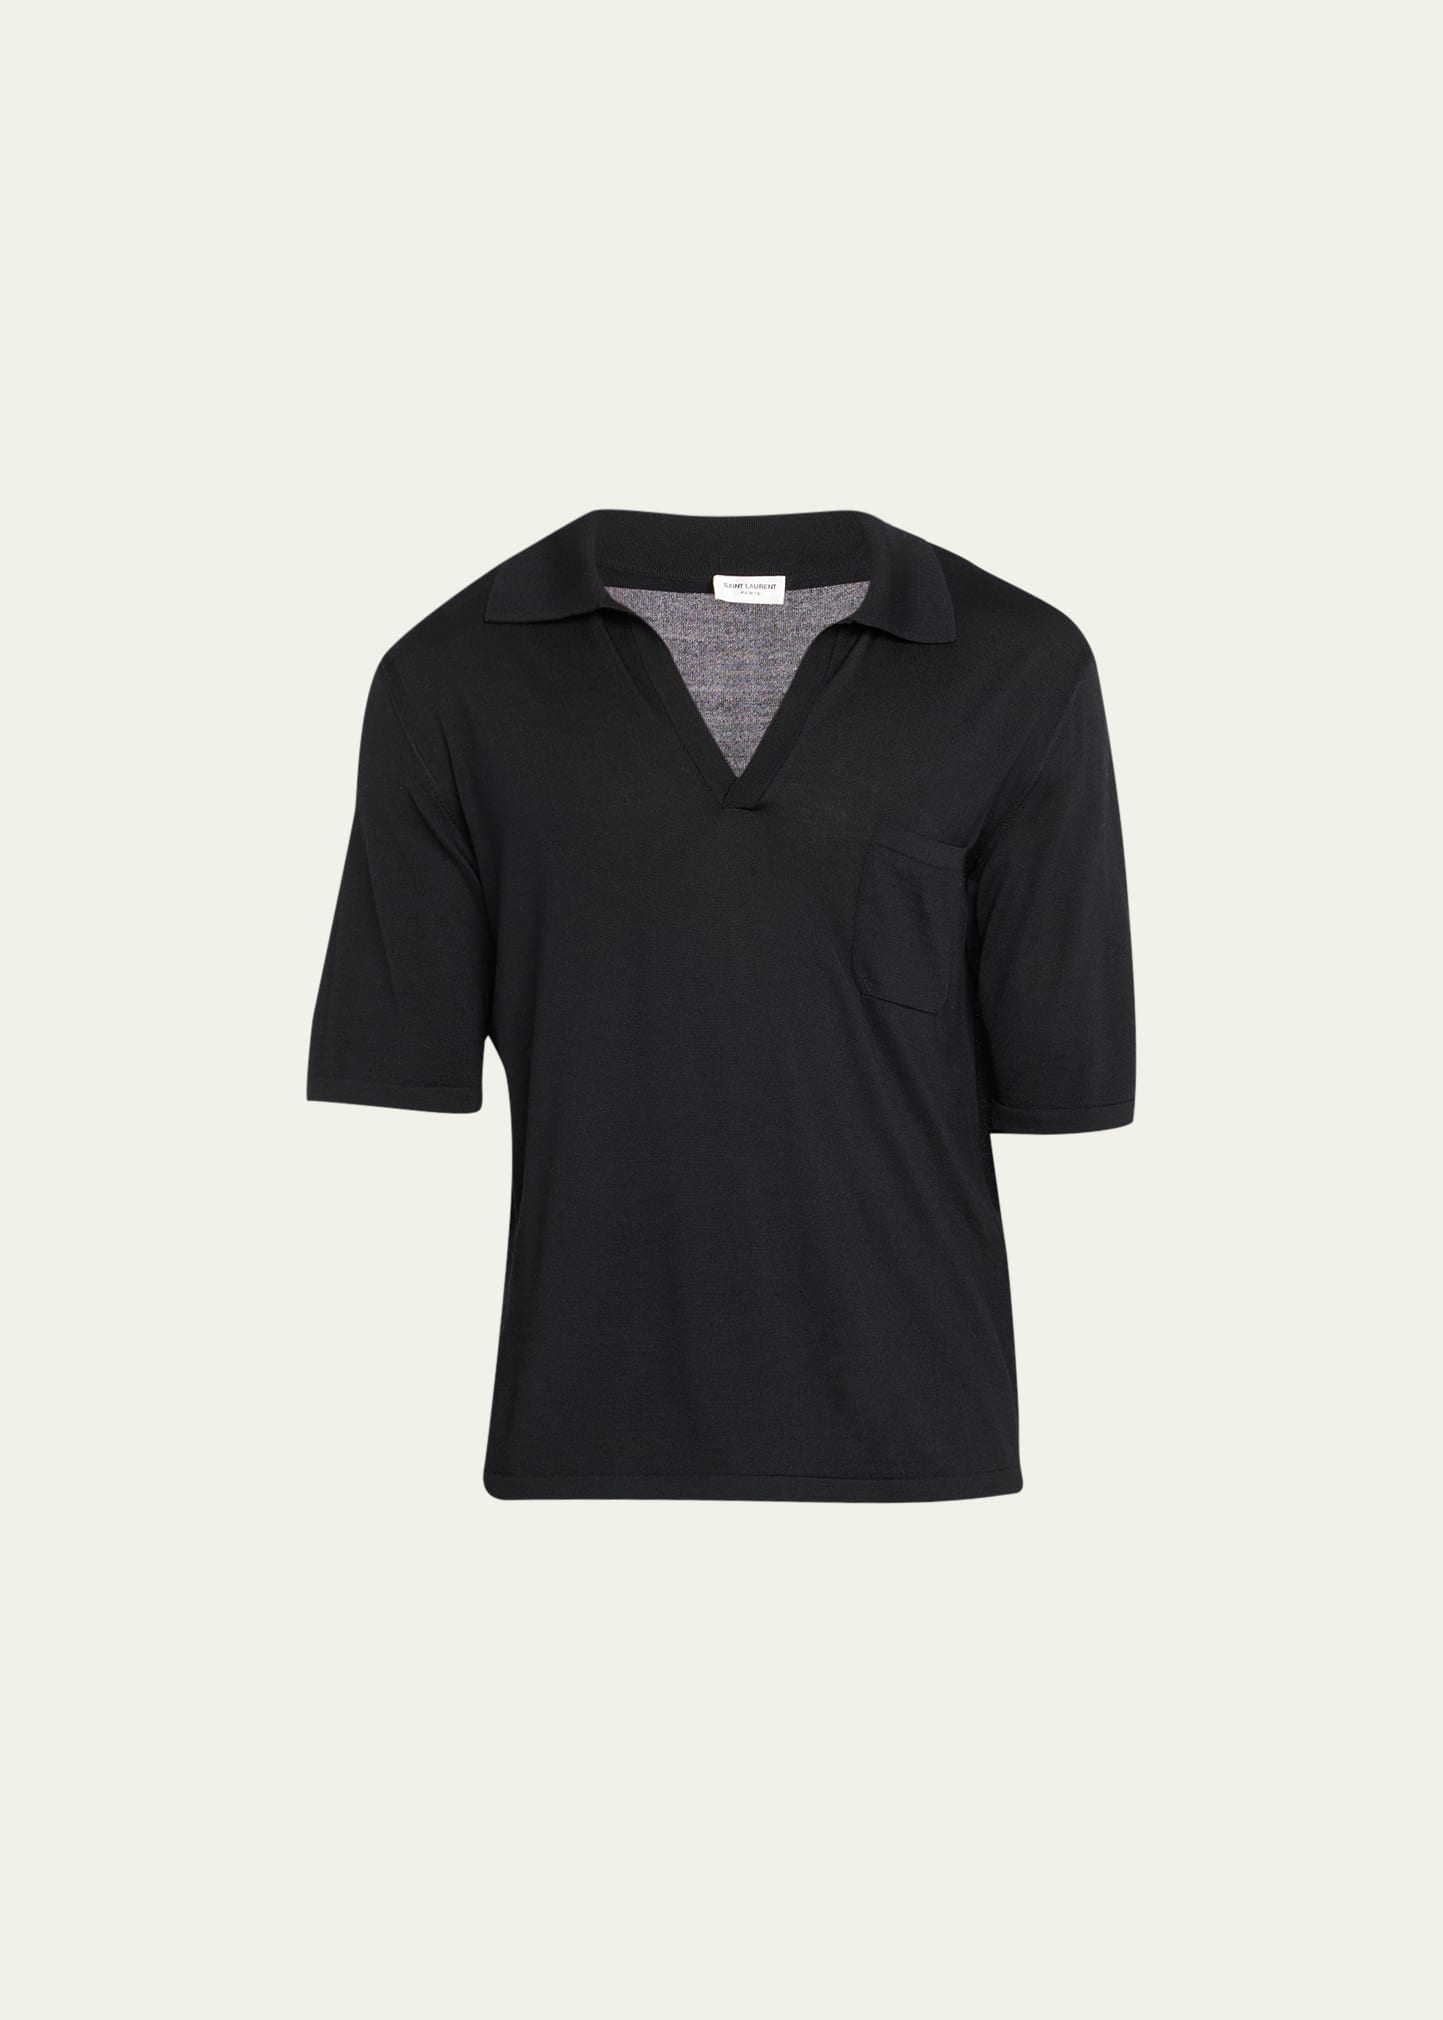 Saint Laurent Men's Knit Polo Shirt With Open Collar In Nero